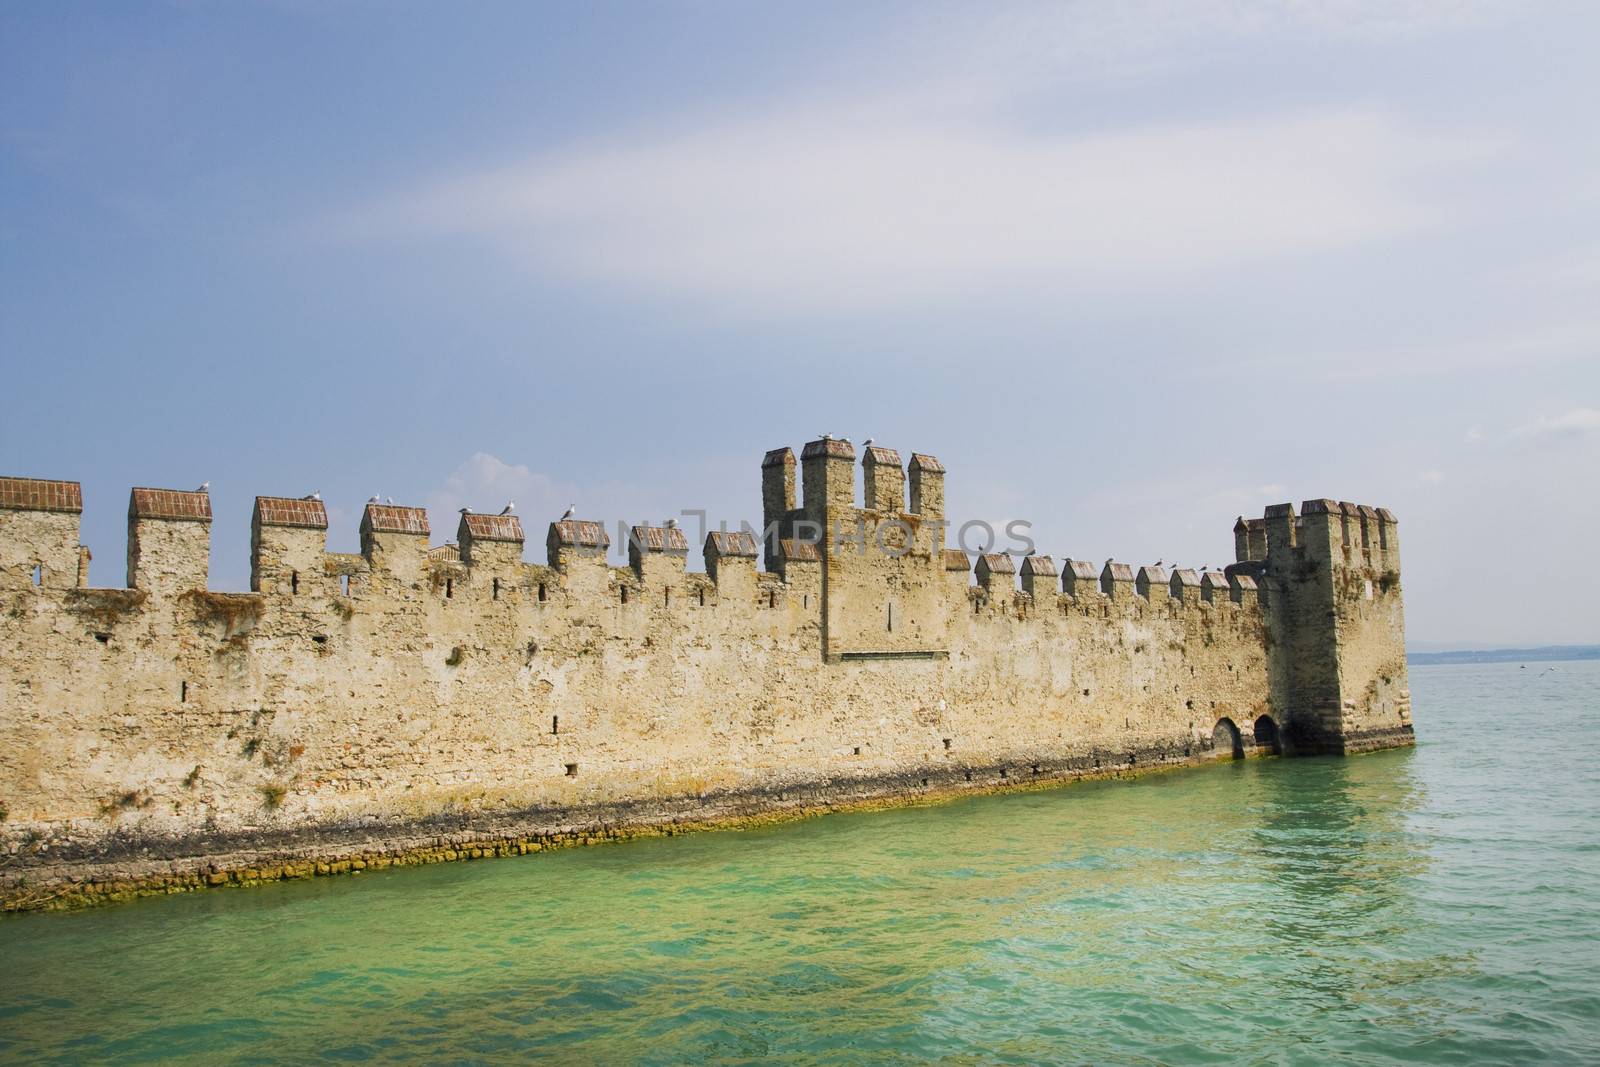 Sirmione castle by adrenalina